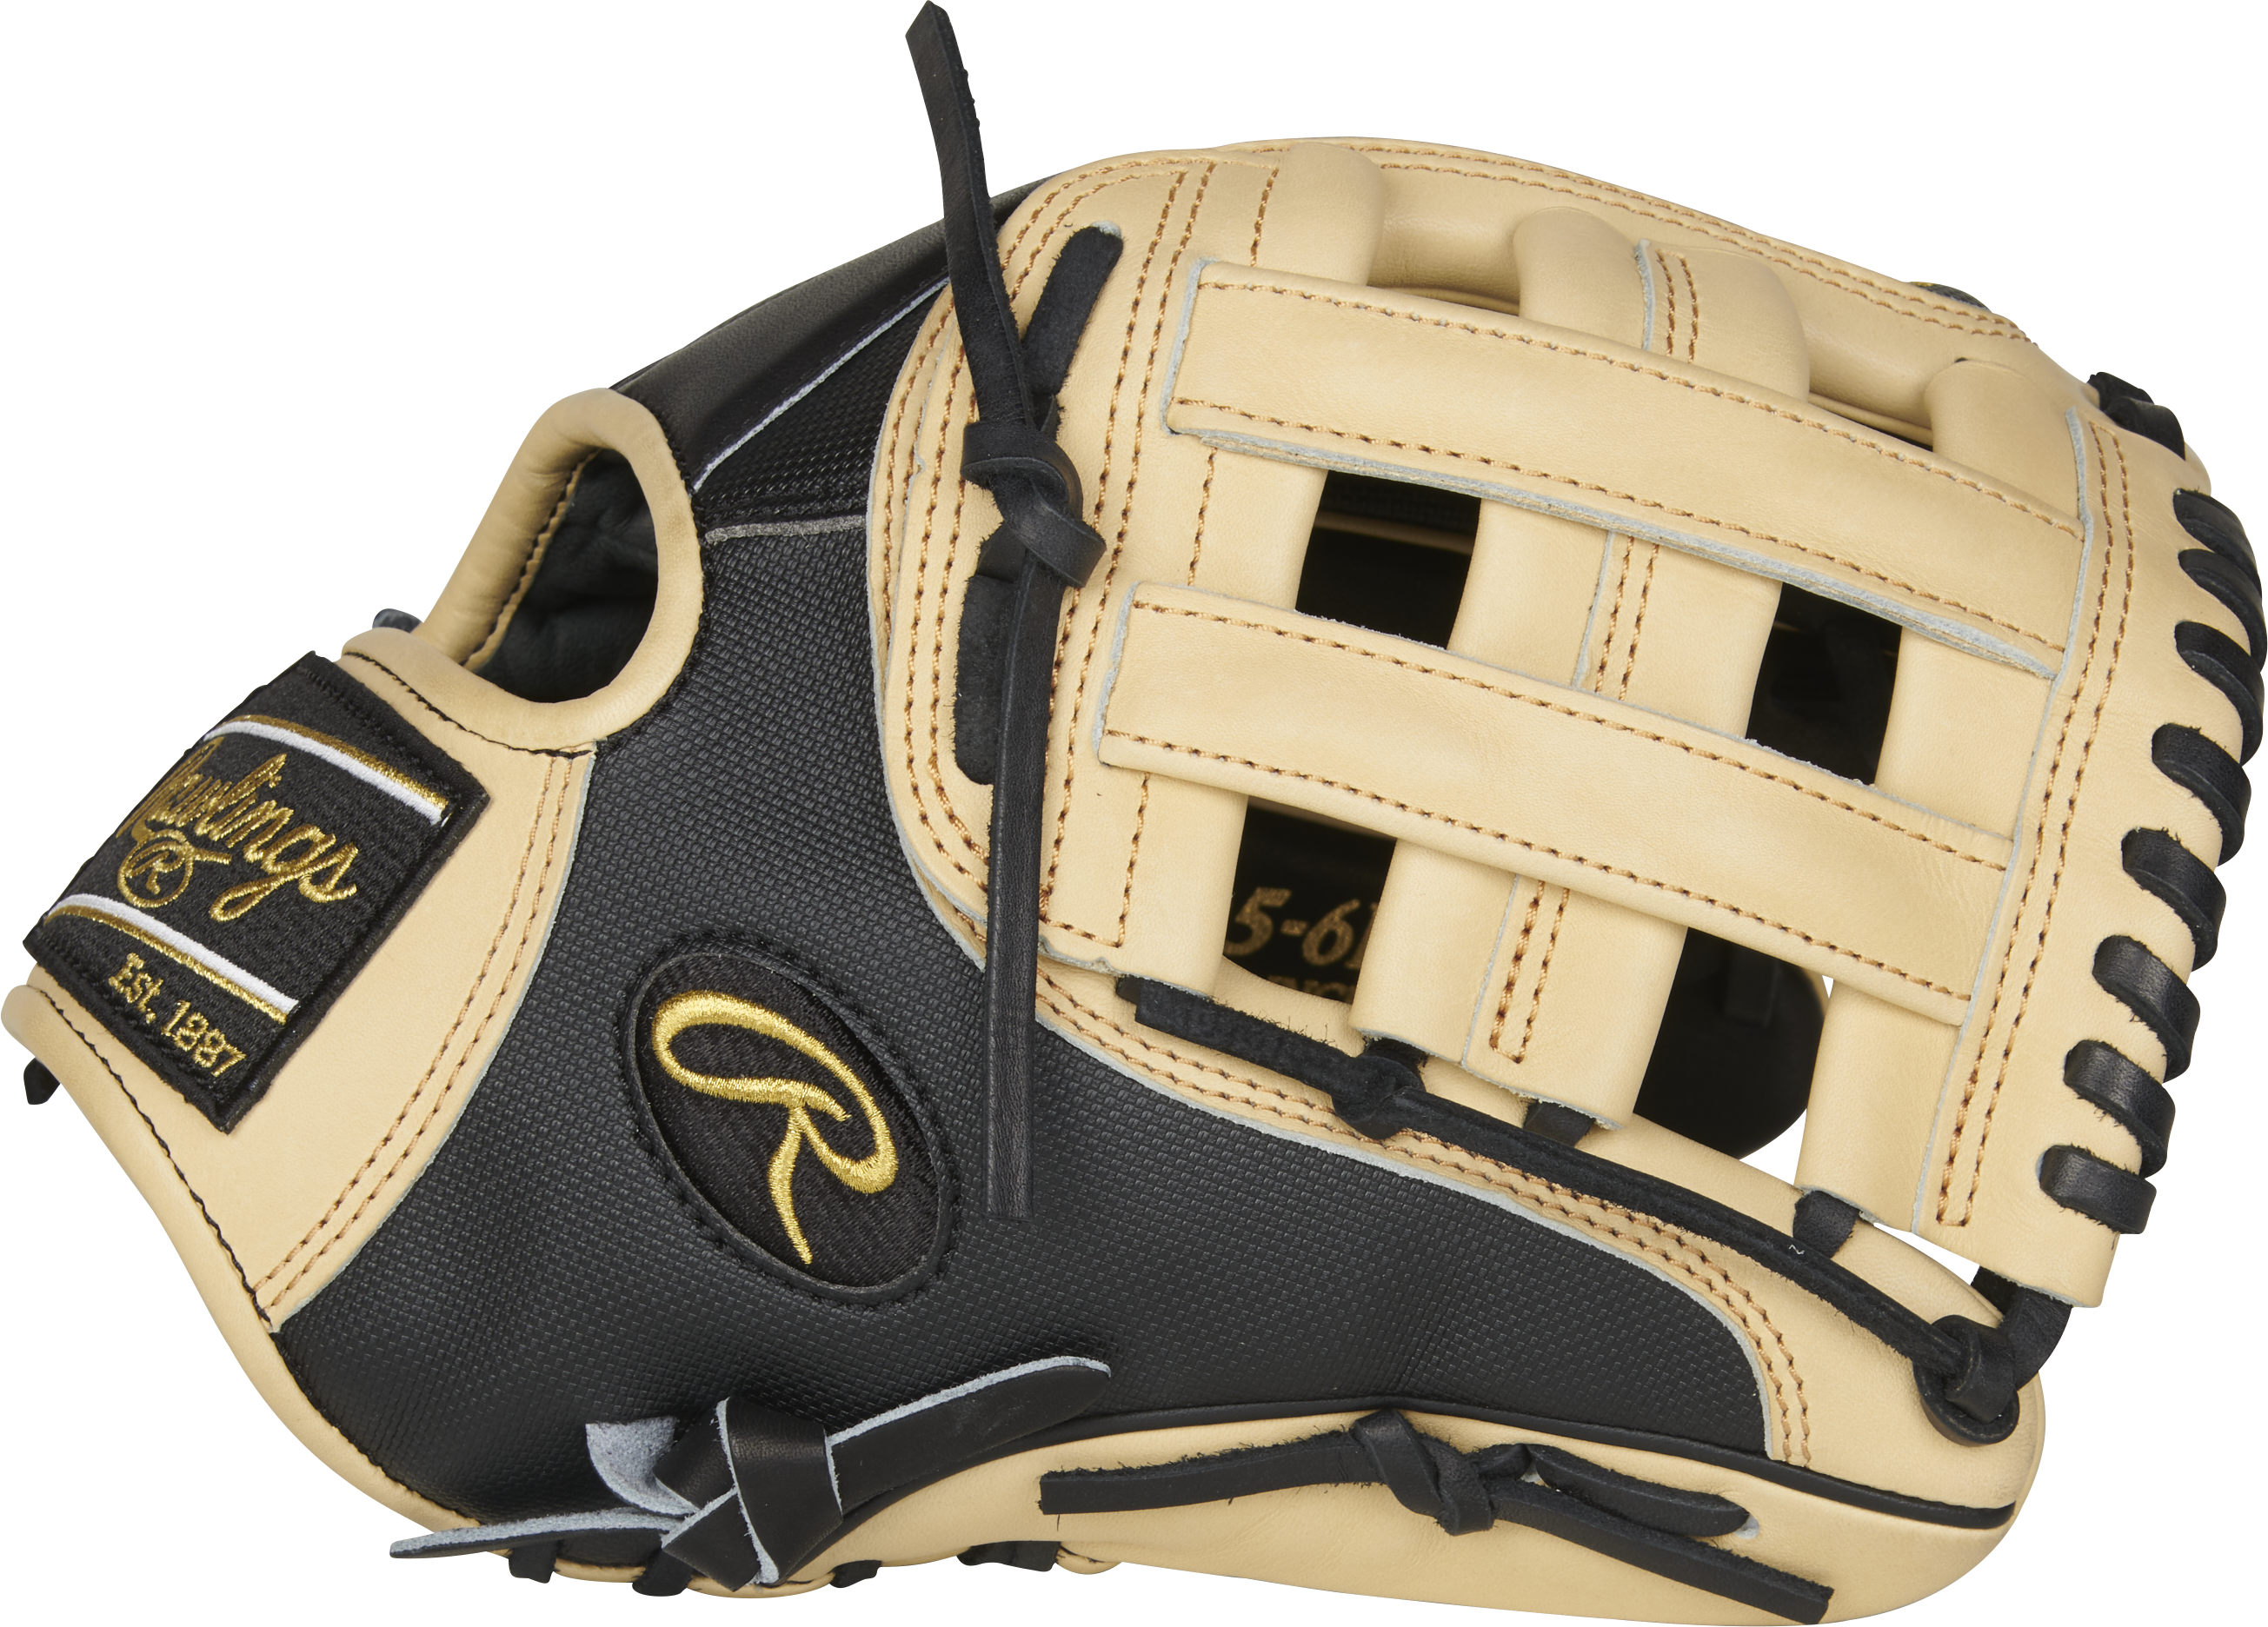 Rawlings Heart of the Hide PRO205-6BCSS 11.75